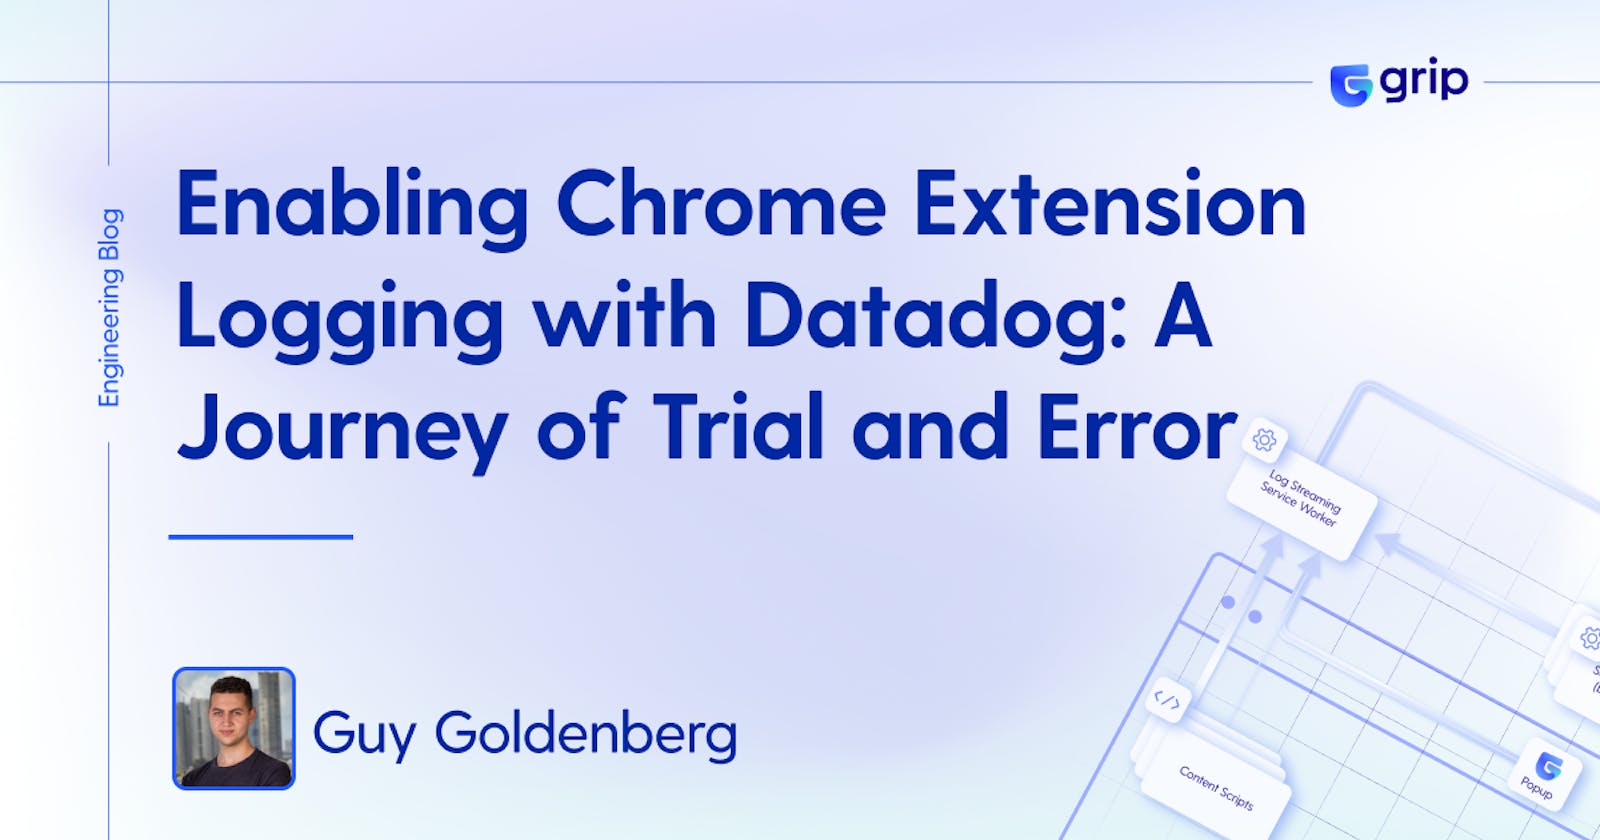 Enabling Chrome Extension Logging with Datadog: A Journey of Trial and Error